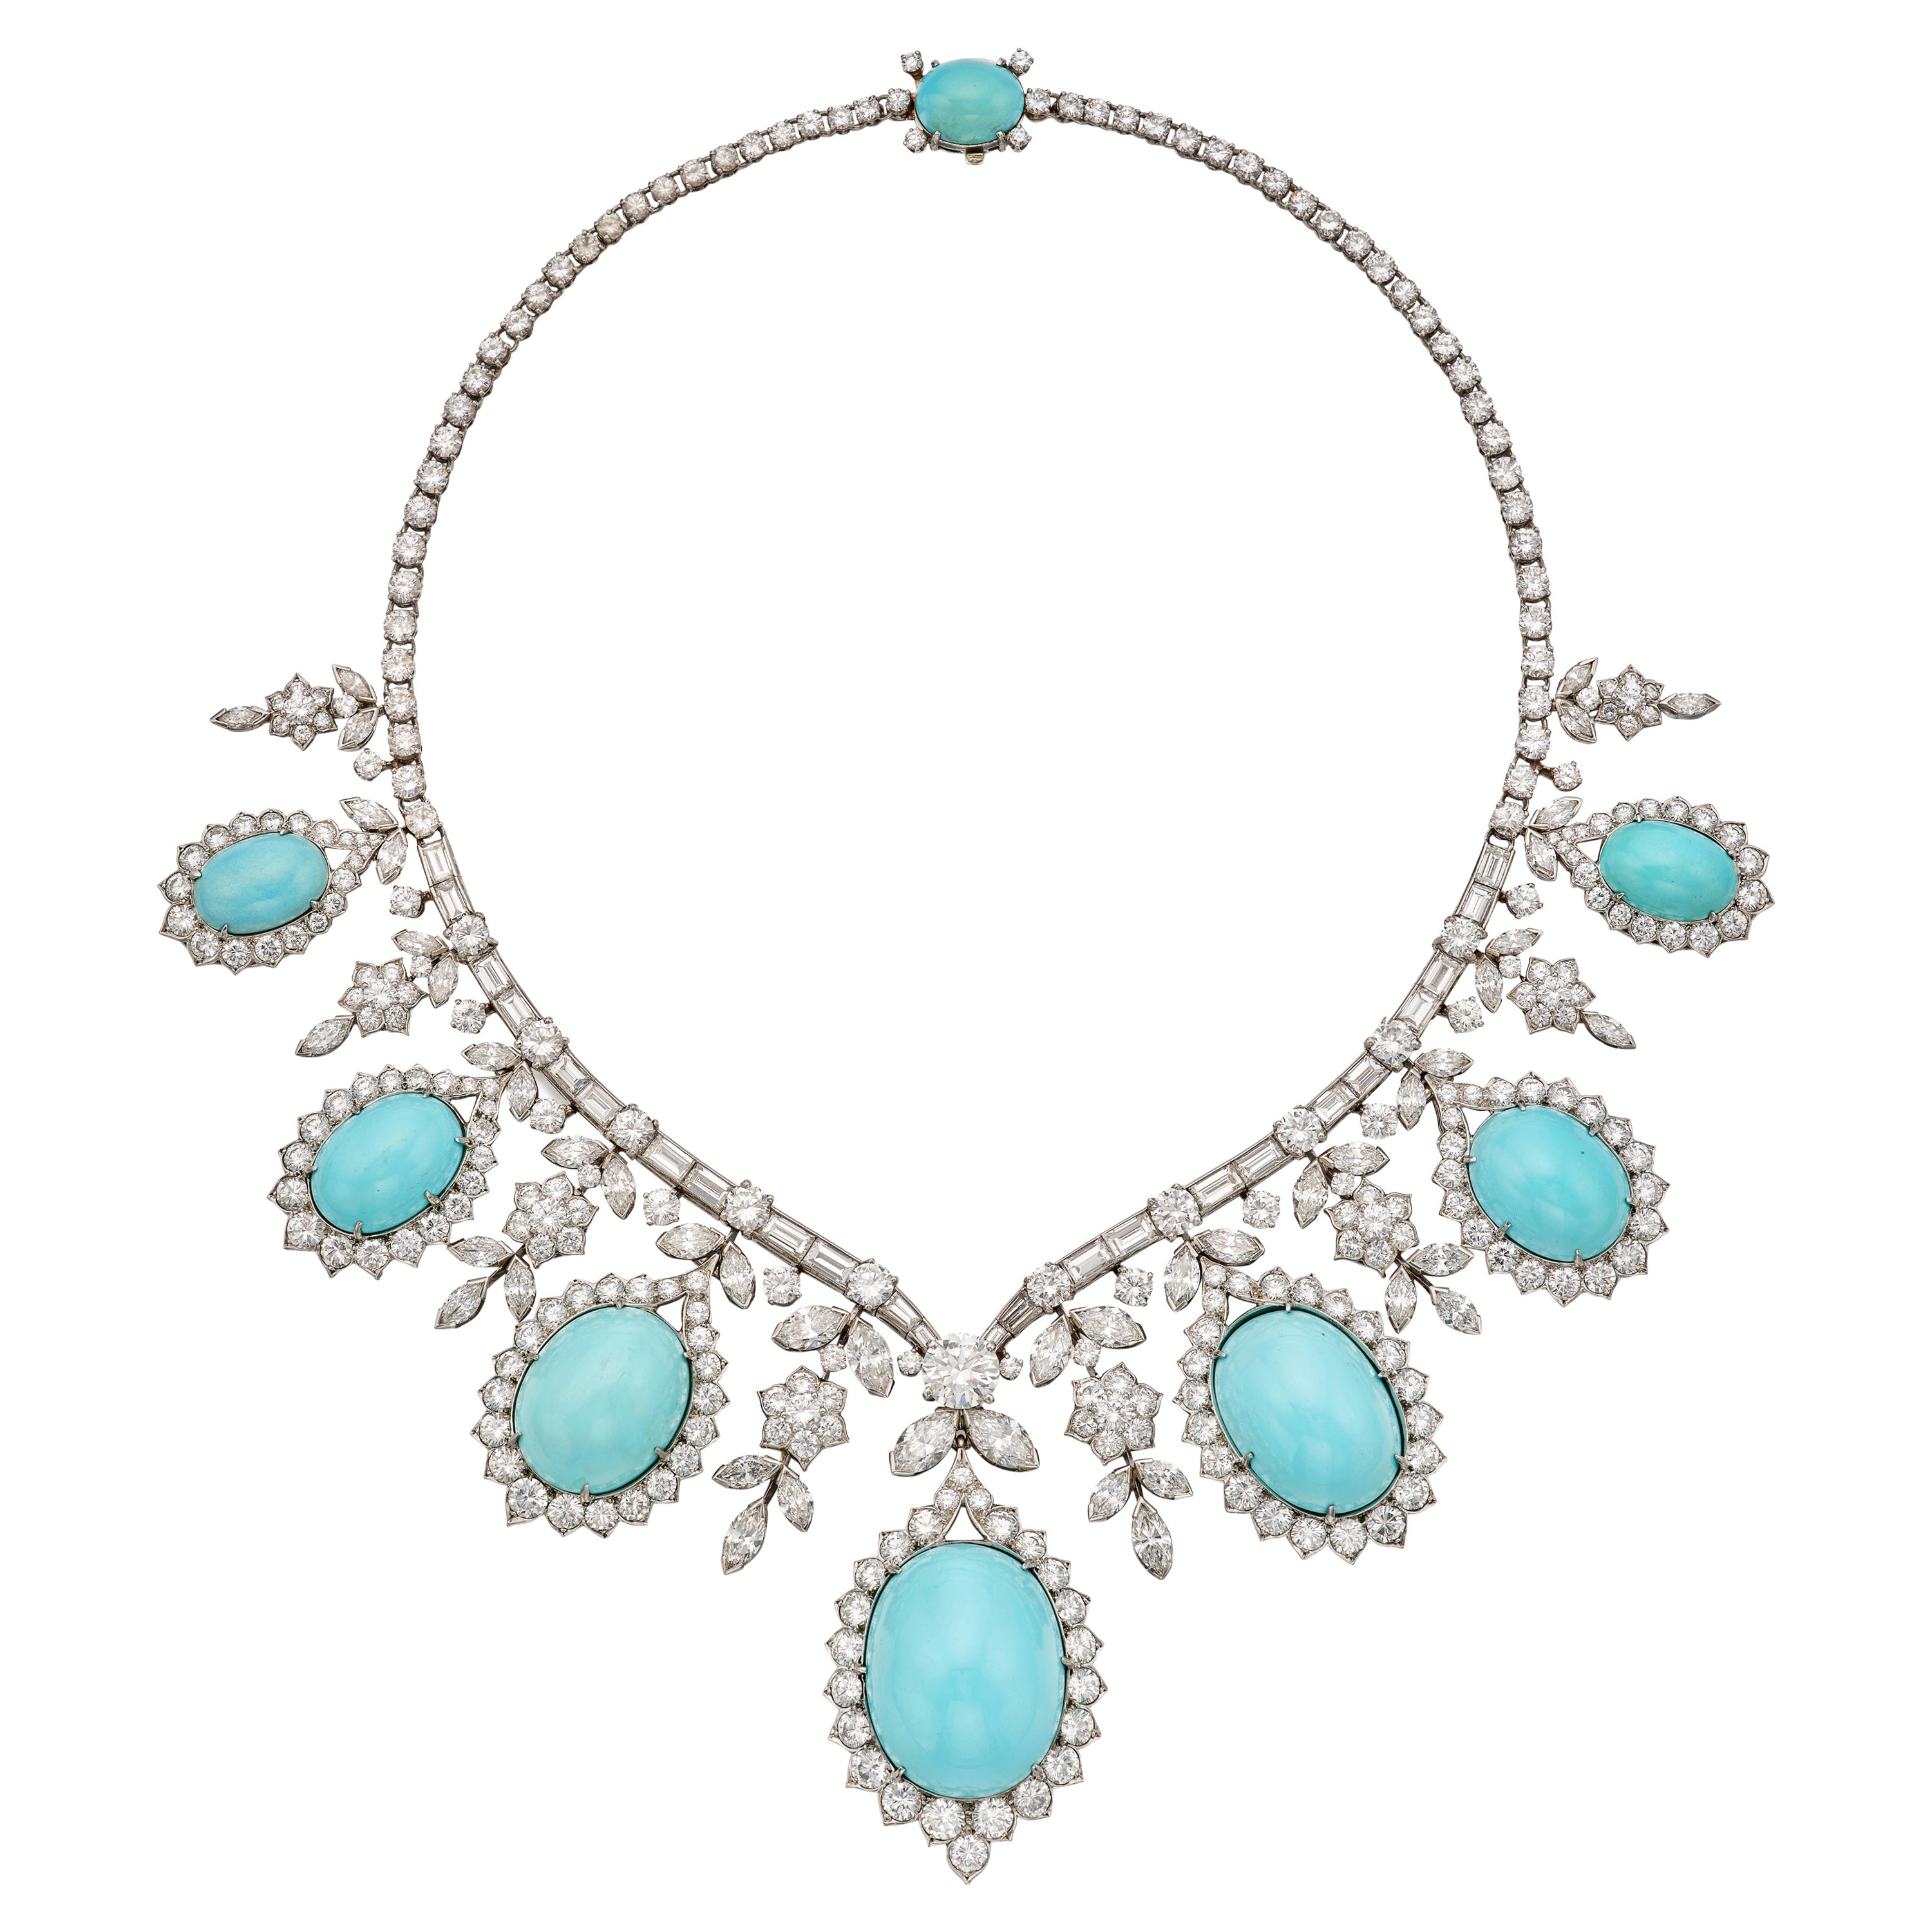 Van Cleef & Arpels Turquoise and Diamond Necklace, ca. 1955